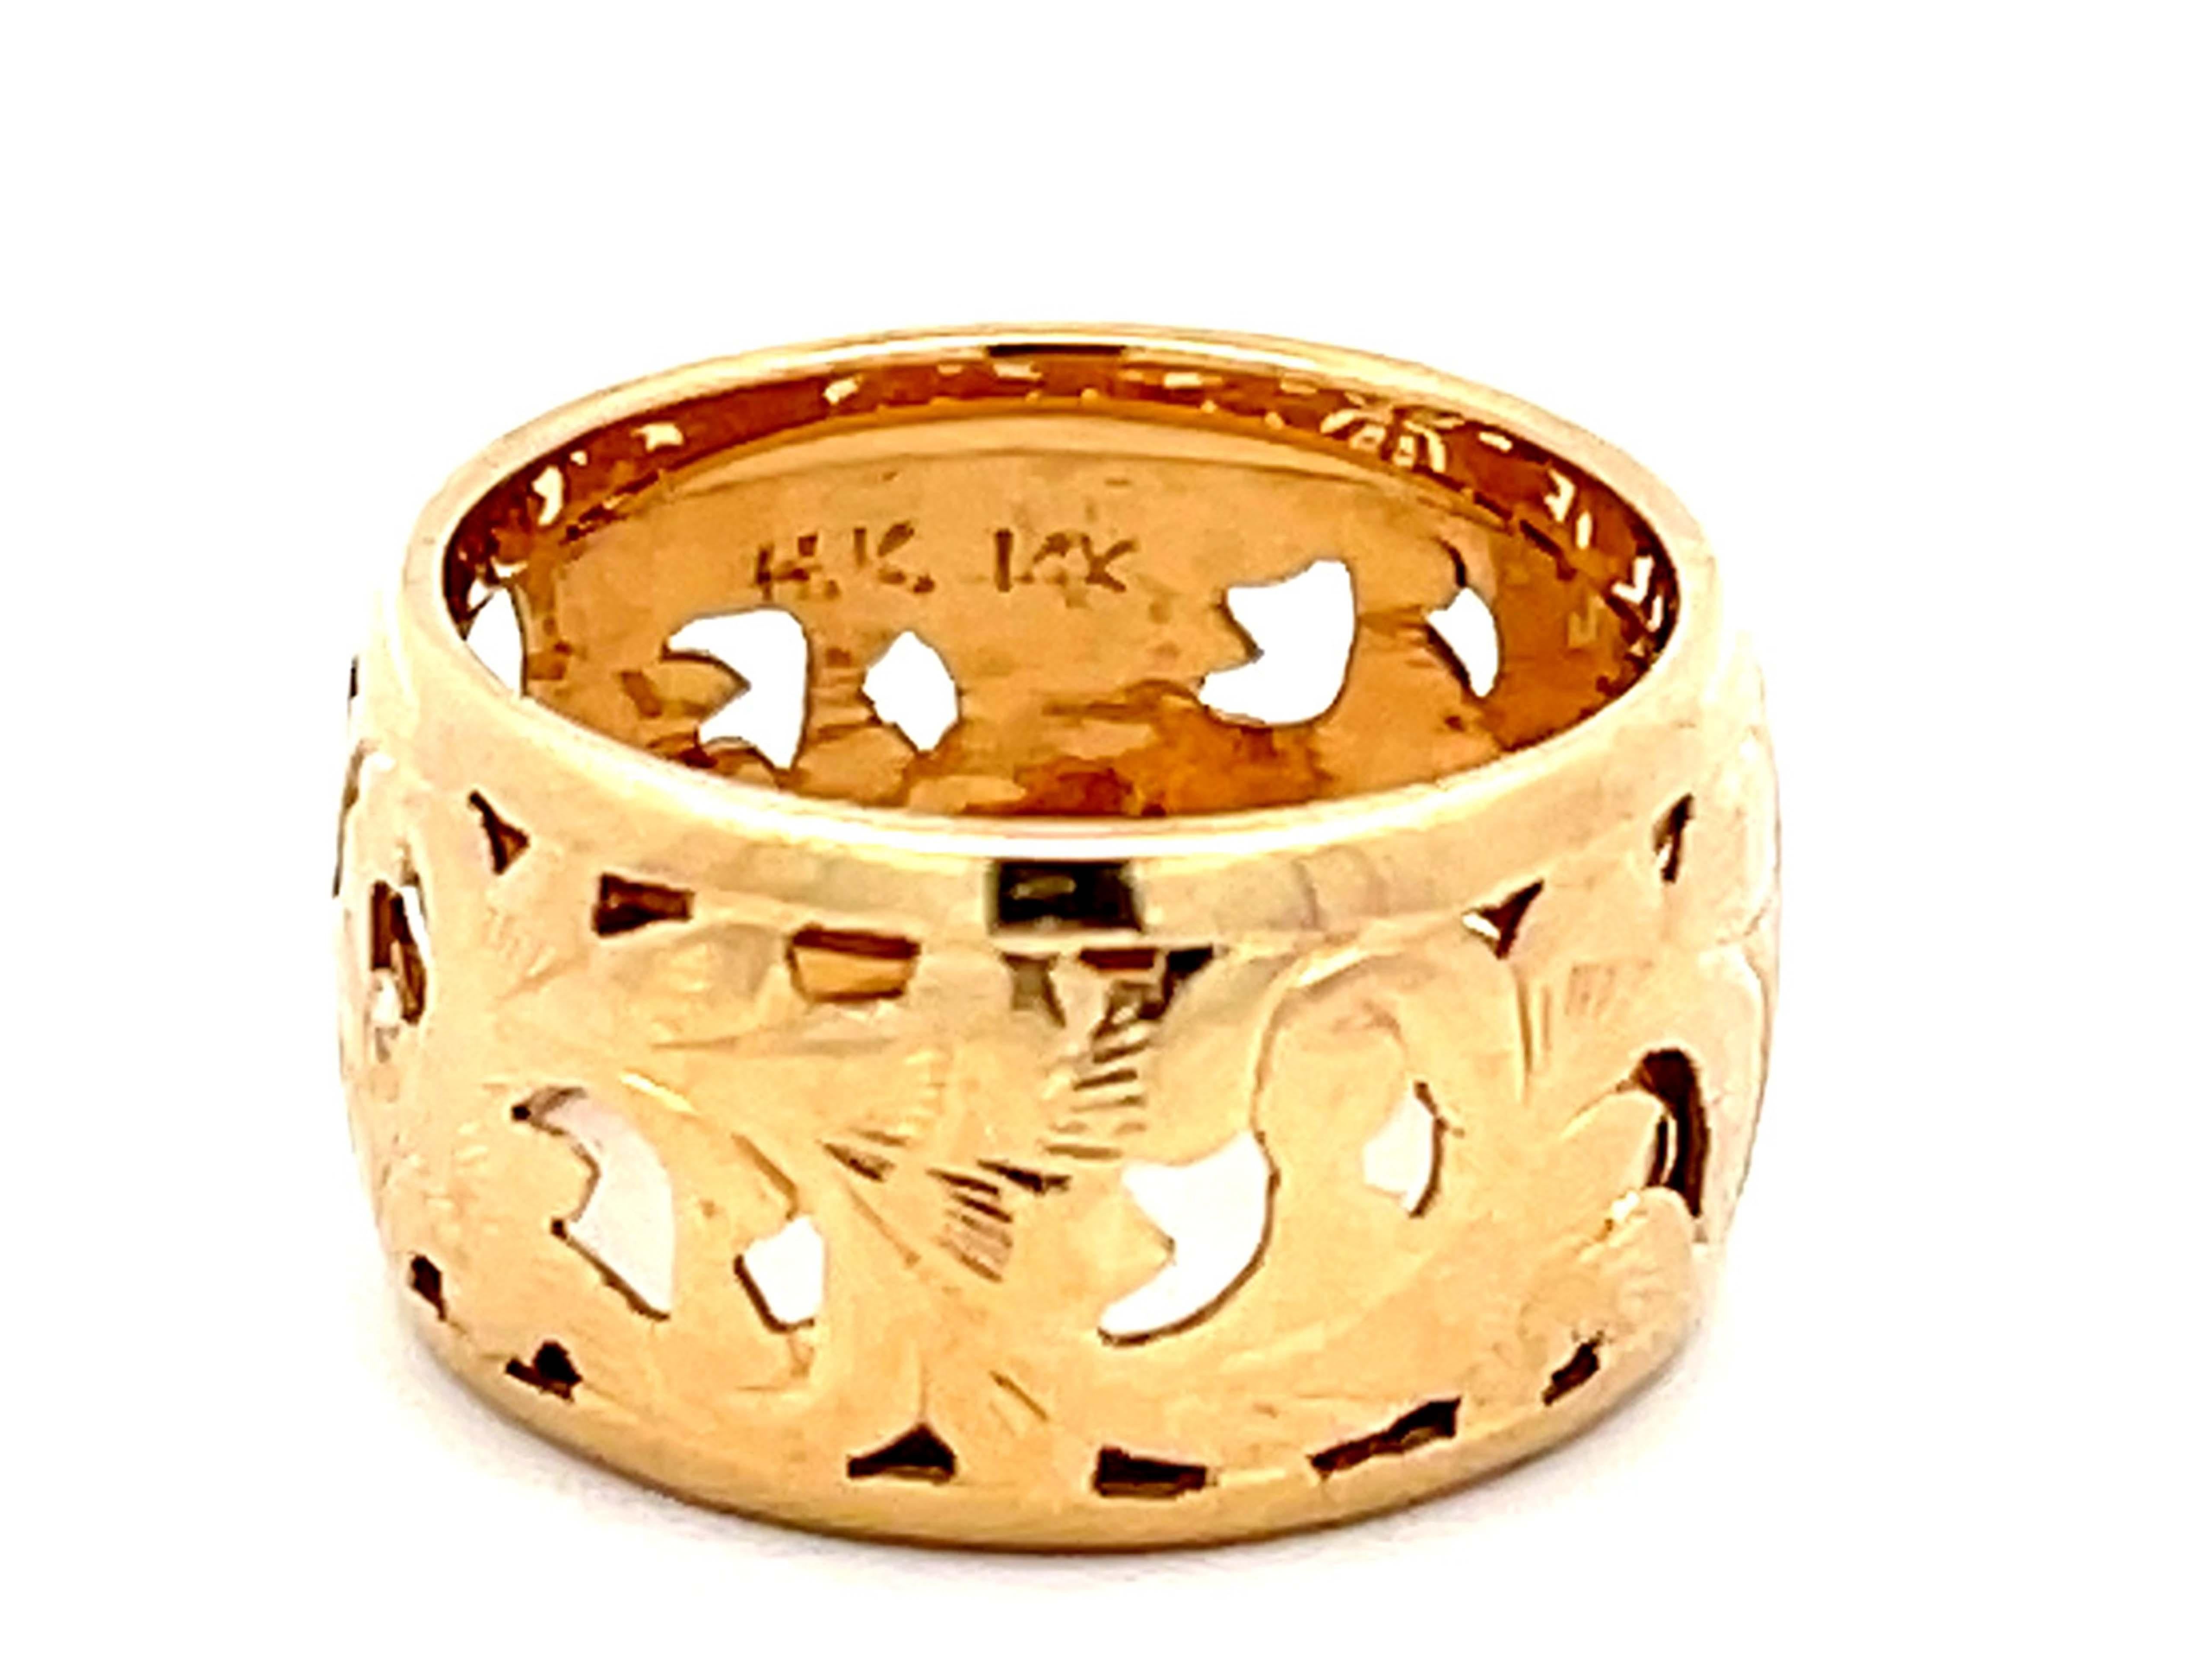 Mings Longevity Cutout Band Ring in 14k Yellow Gold In Excellent Condition For Sale In Honolulu, HI